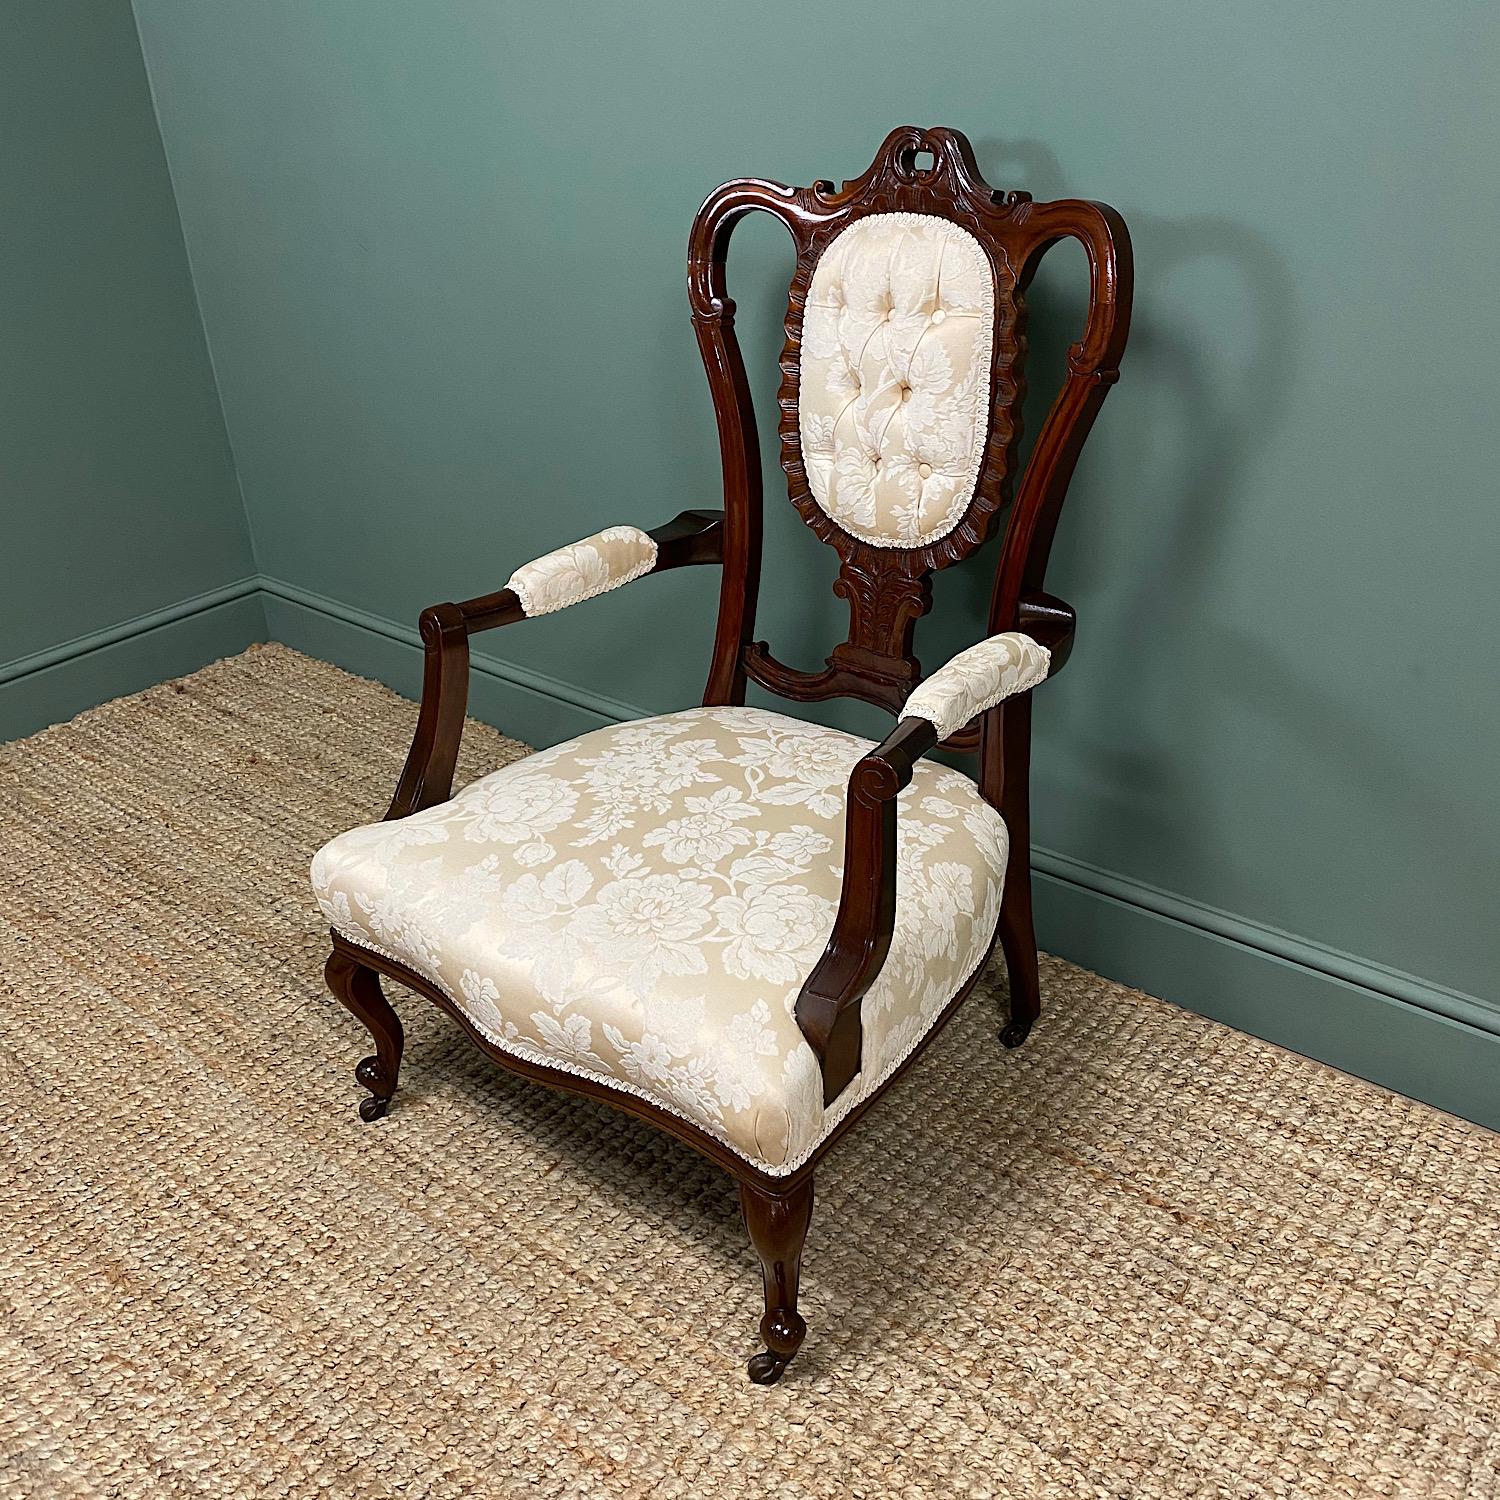 Elegant Victorian Upholstered Antique Arm Chair

This Elegant late 19th century Mahogany Victorian Upholstered Antique Arm Chair dates from ca. 1890 and has a beautifully carved back with two out swept arms, splayed back legs and cabriole front legs